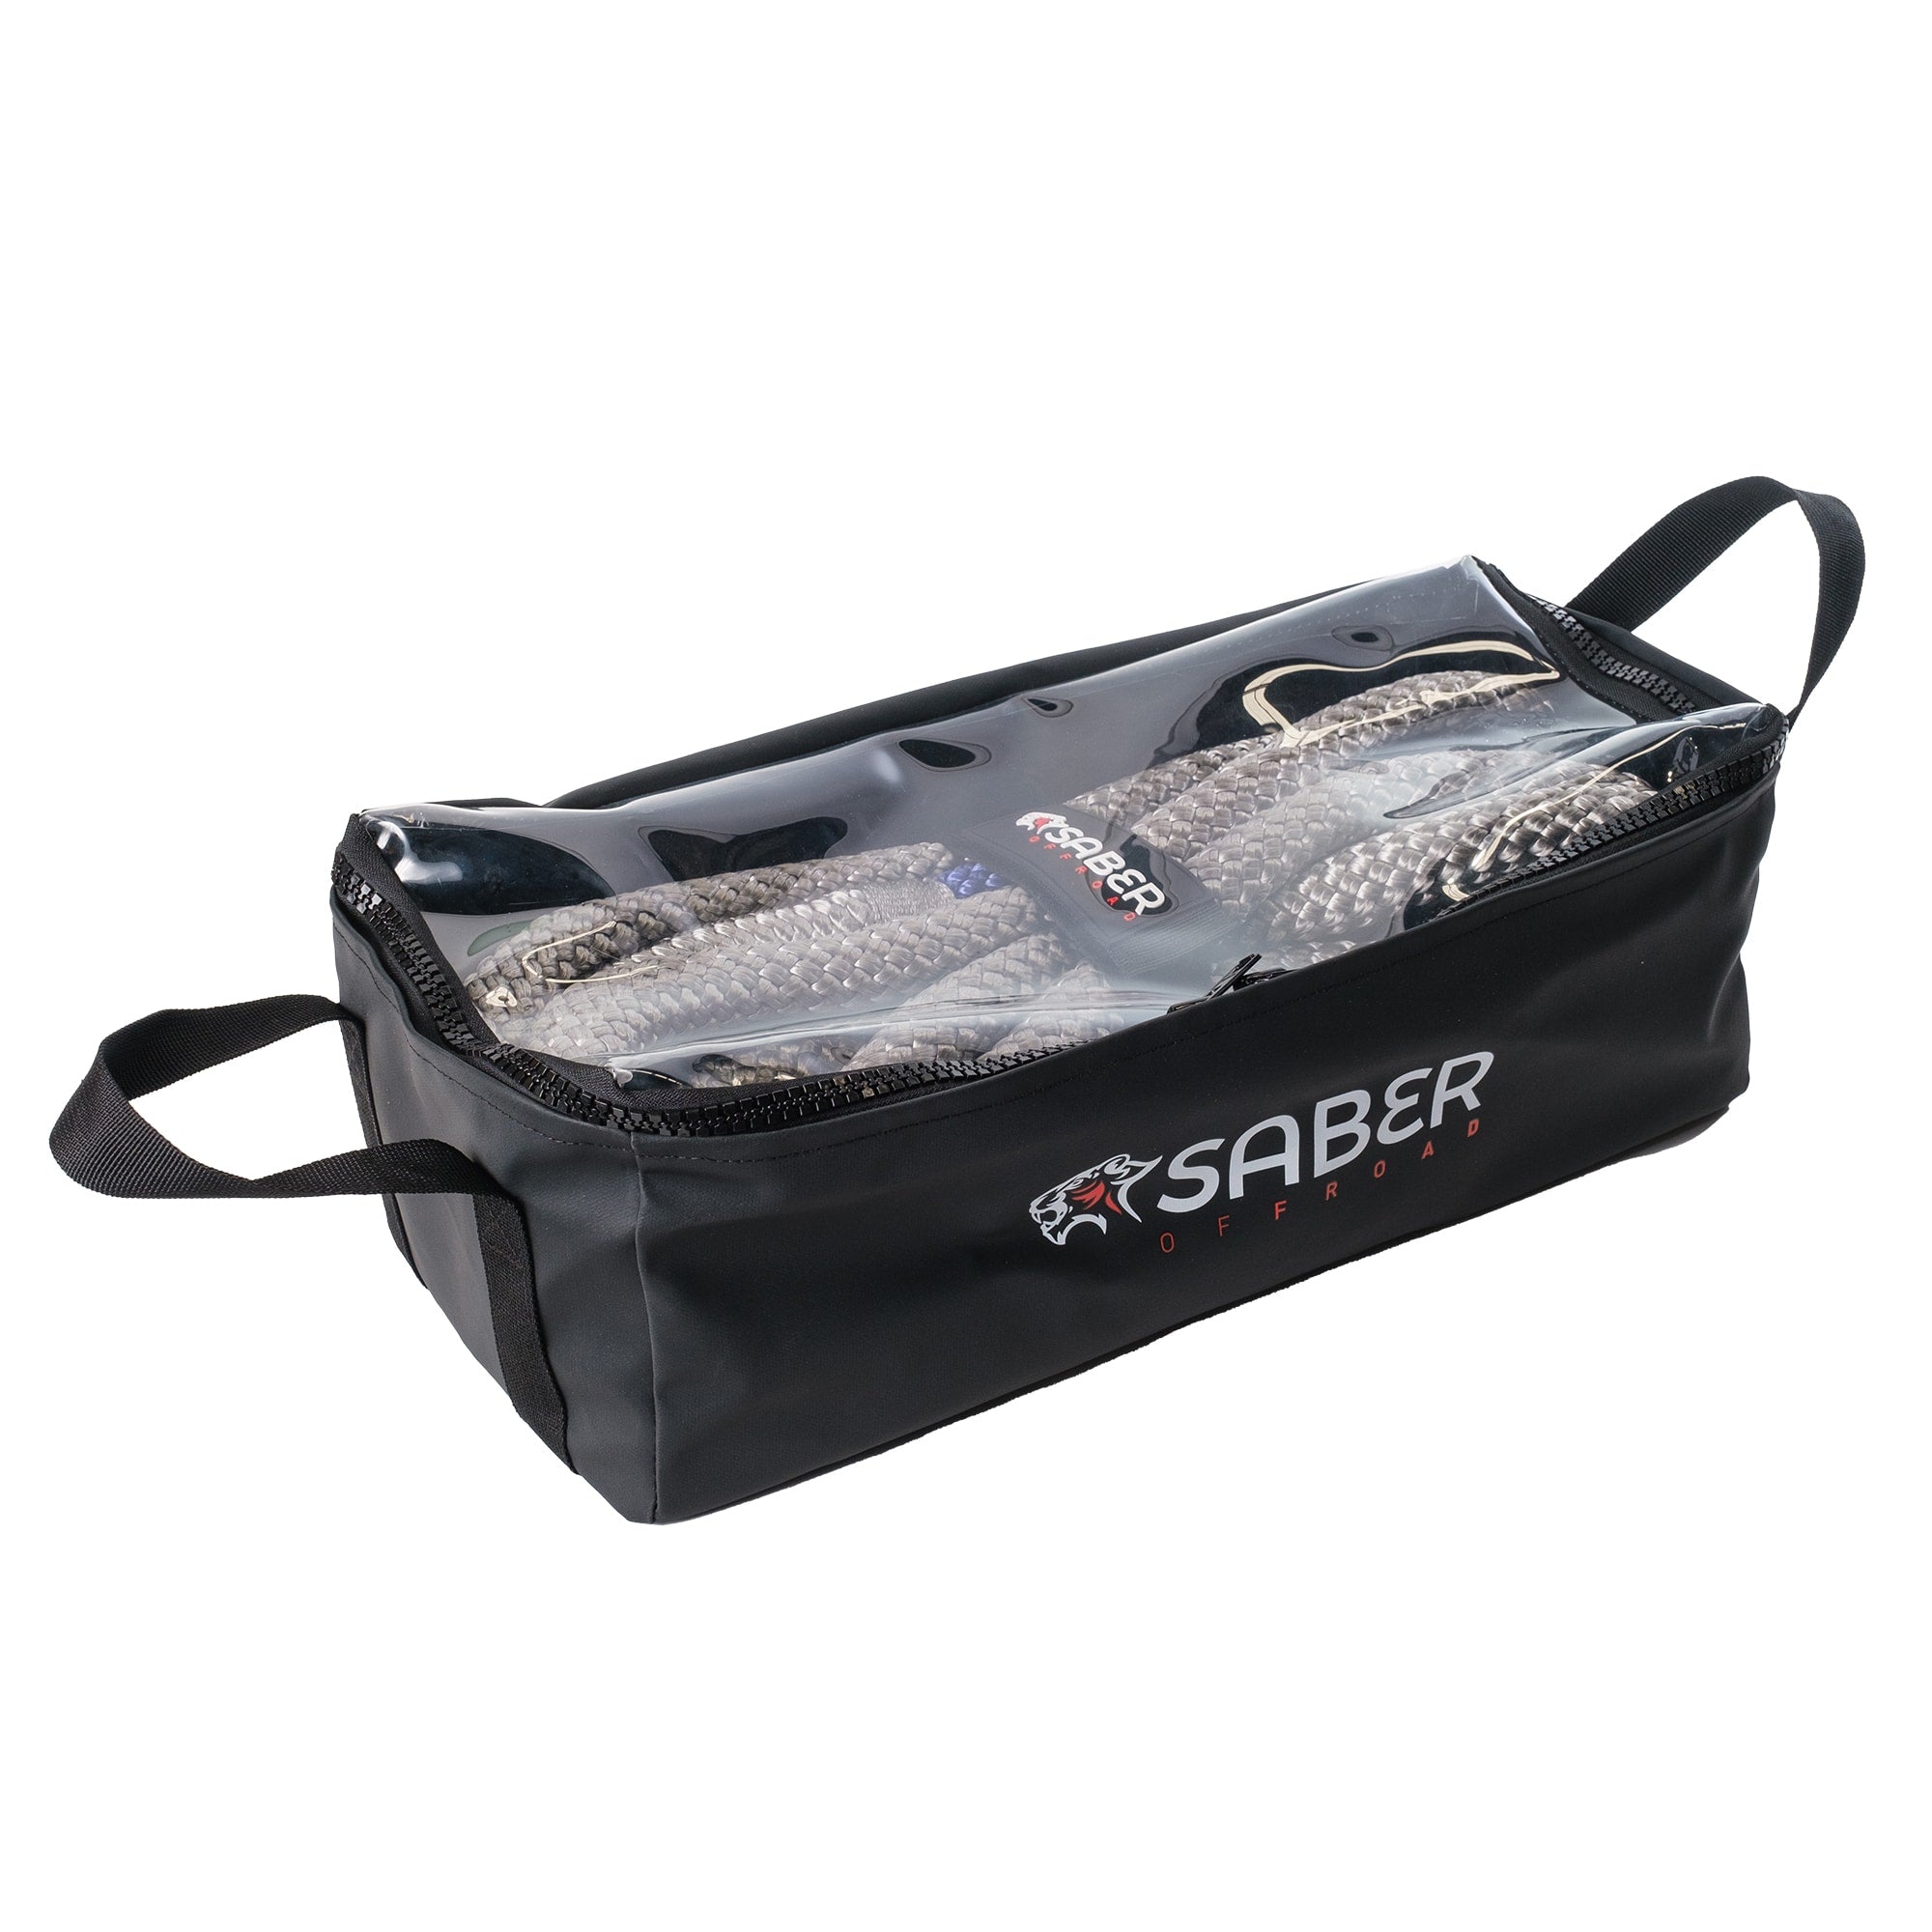 Clear Top Gear Bag - Large